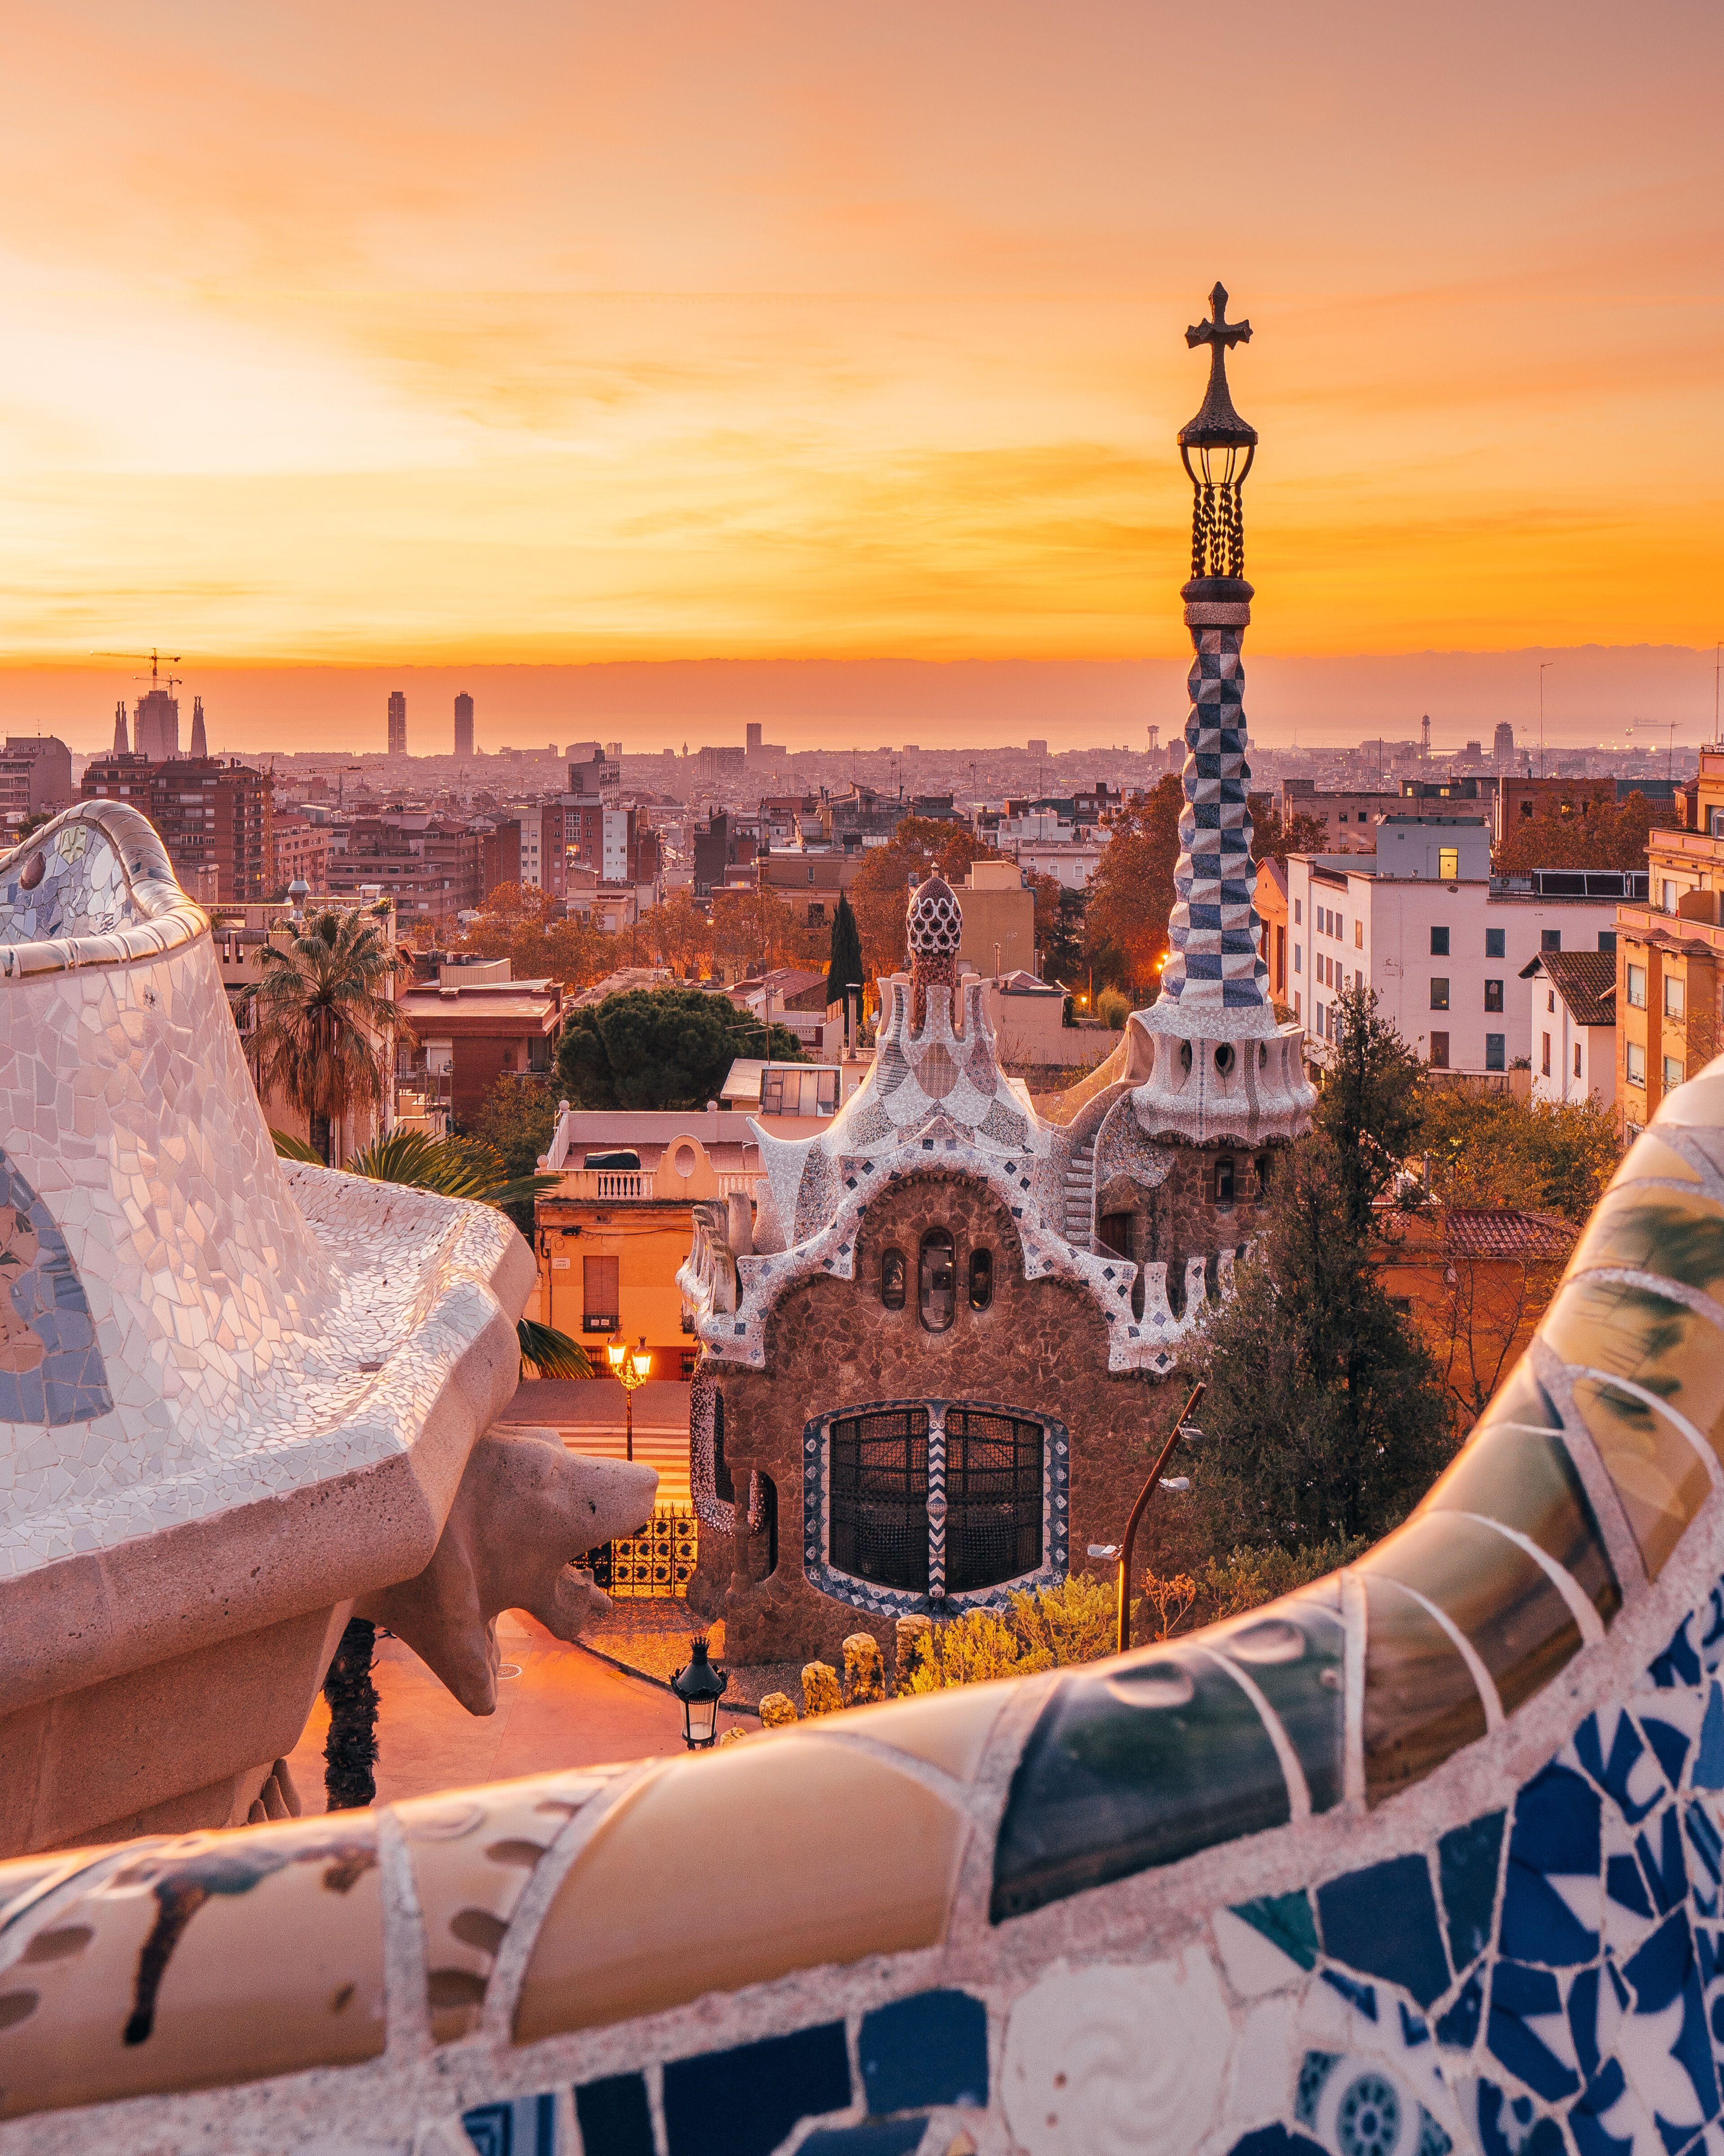 Beautiful sunrise in Barcelona seen from Park Guell. Park was built from 1900 to 1914 and was officially opened as a public park in 1926. In 1984, UNESCO declared the park a World Heritage Site.